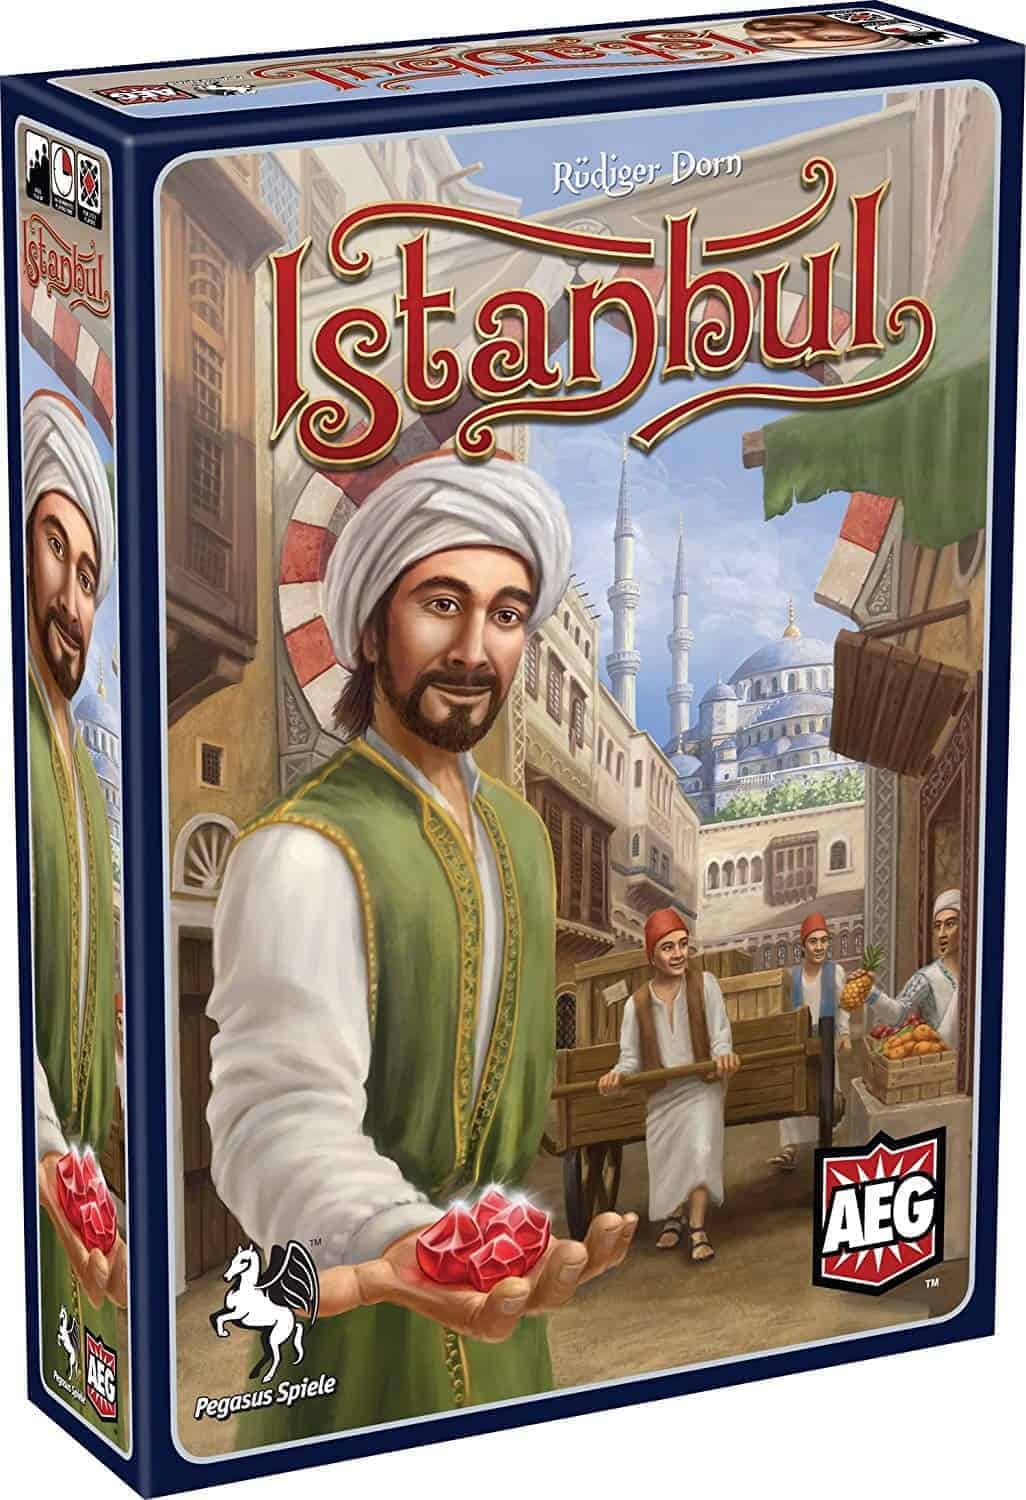 Picking the top family games is laborious as it is the most popular sort of games. Istanbul was the quickest pick though!